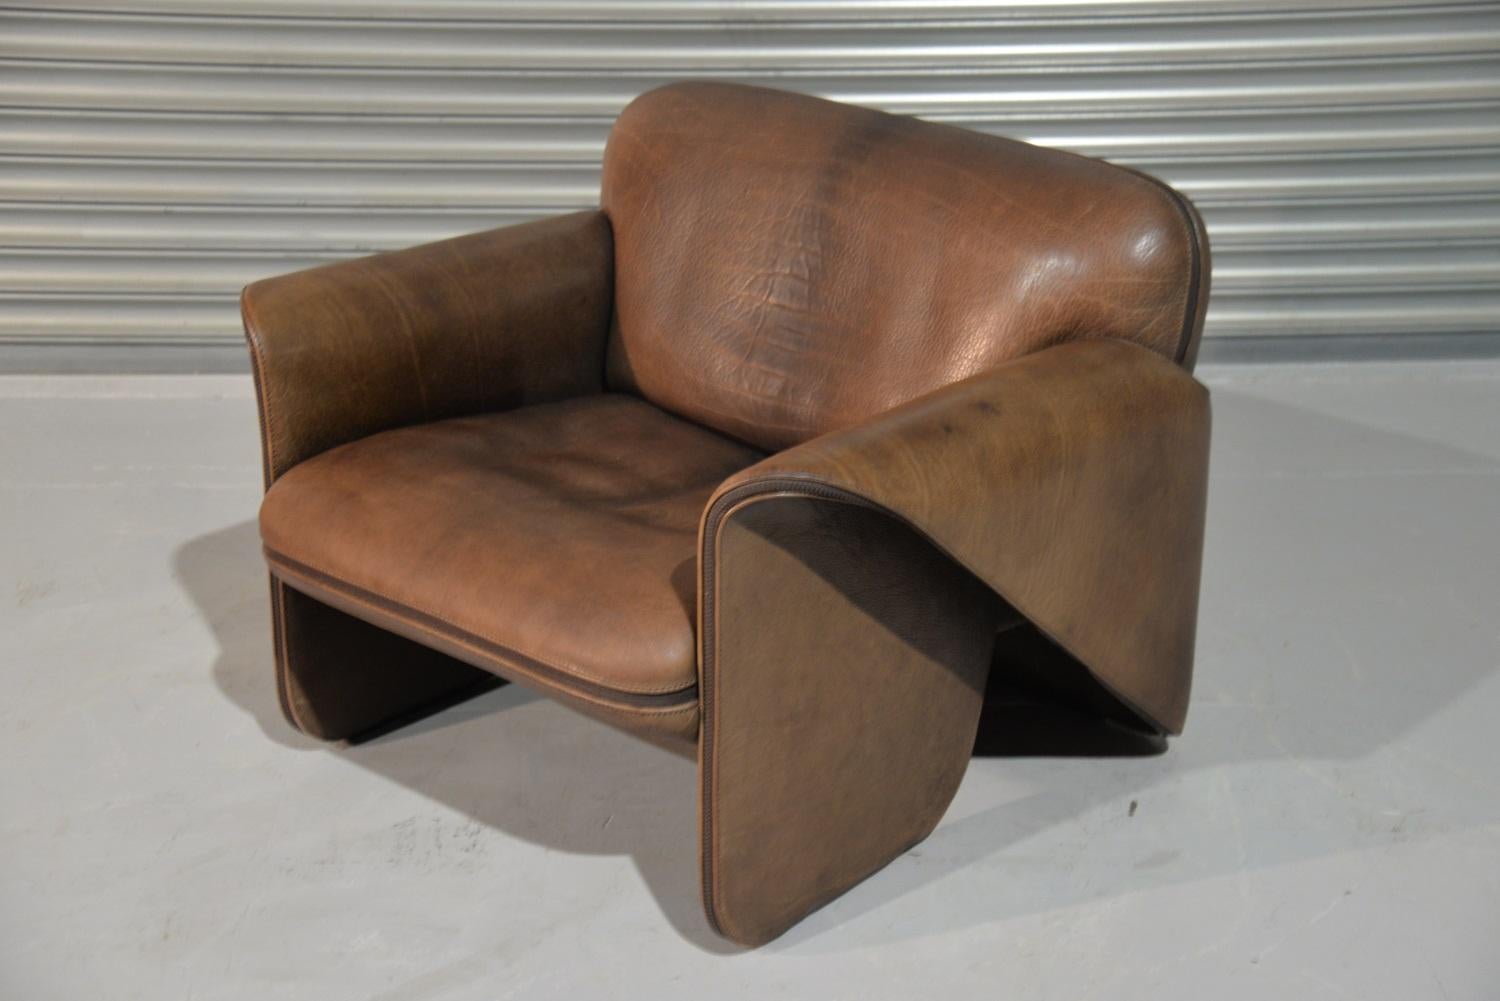 Discounted airfreight for our International customers (from 2 weeks door to door)

Ultra rare vintage De Sede DS 125 armchair by Gerd Lange in 1978. These sculptural pieces are upholstered in 3mm-5mm thick neck leather with a decorative zipper